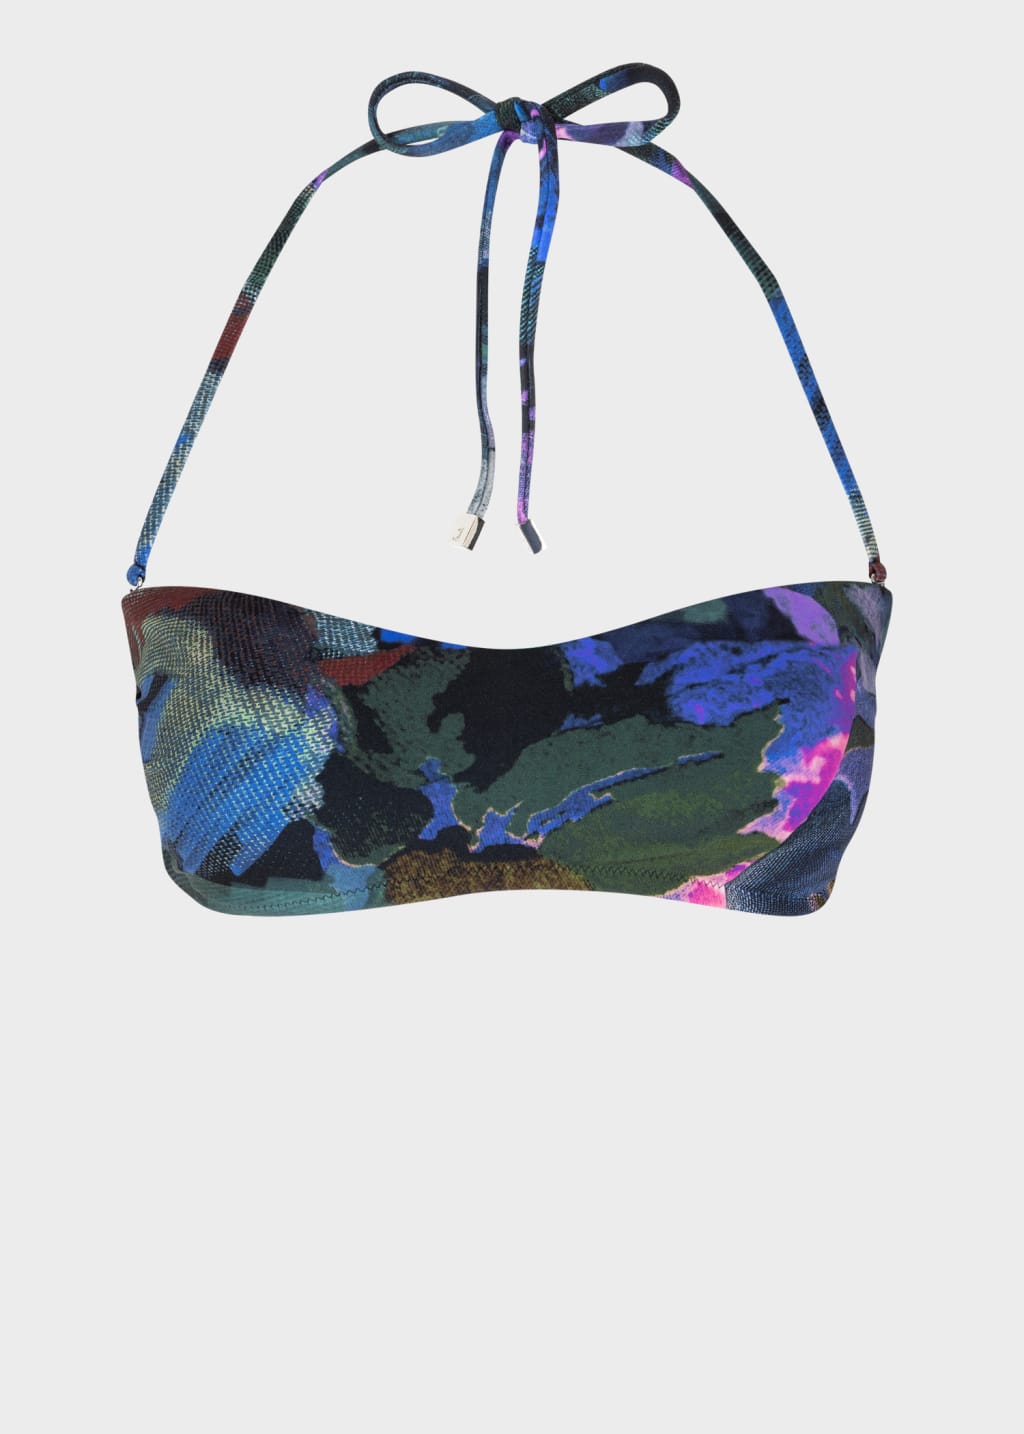 Front View - Women's Navy 'Floral Collage' Bandeau Bikini Top Paul Smith